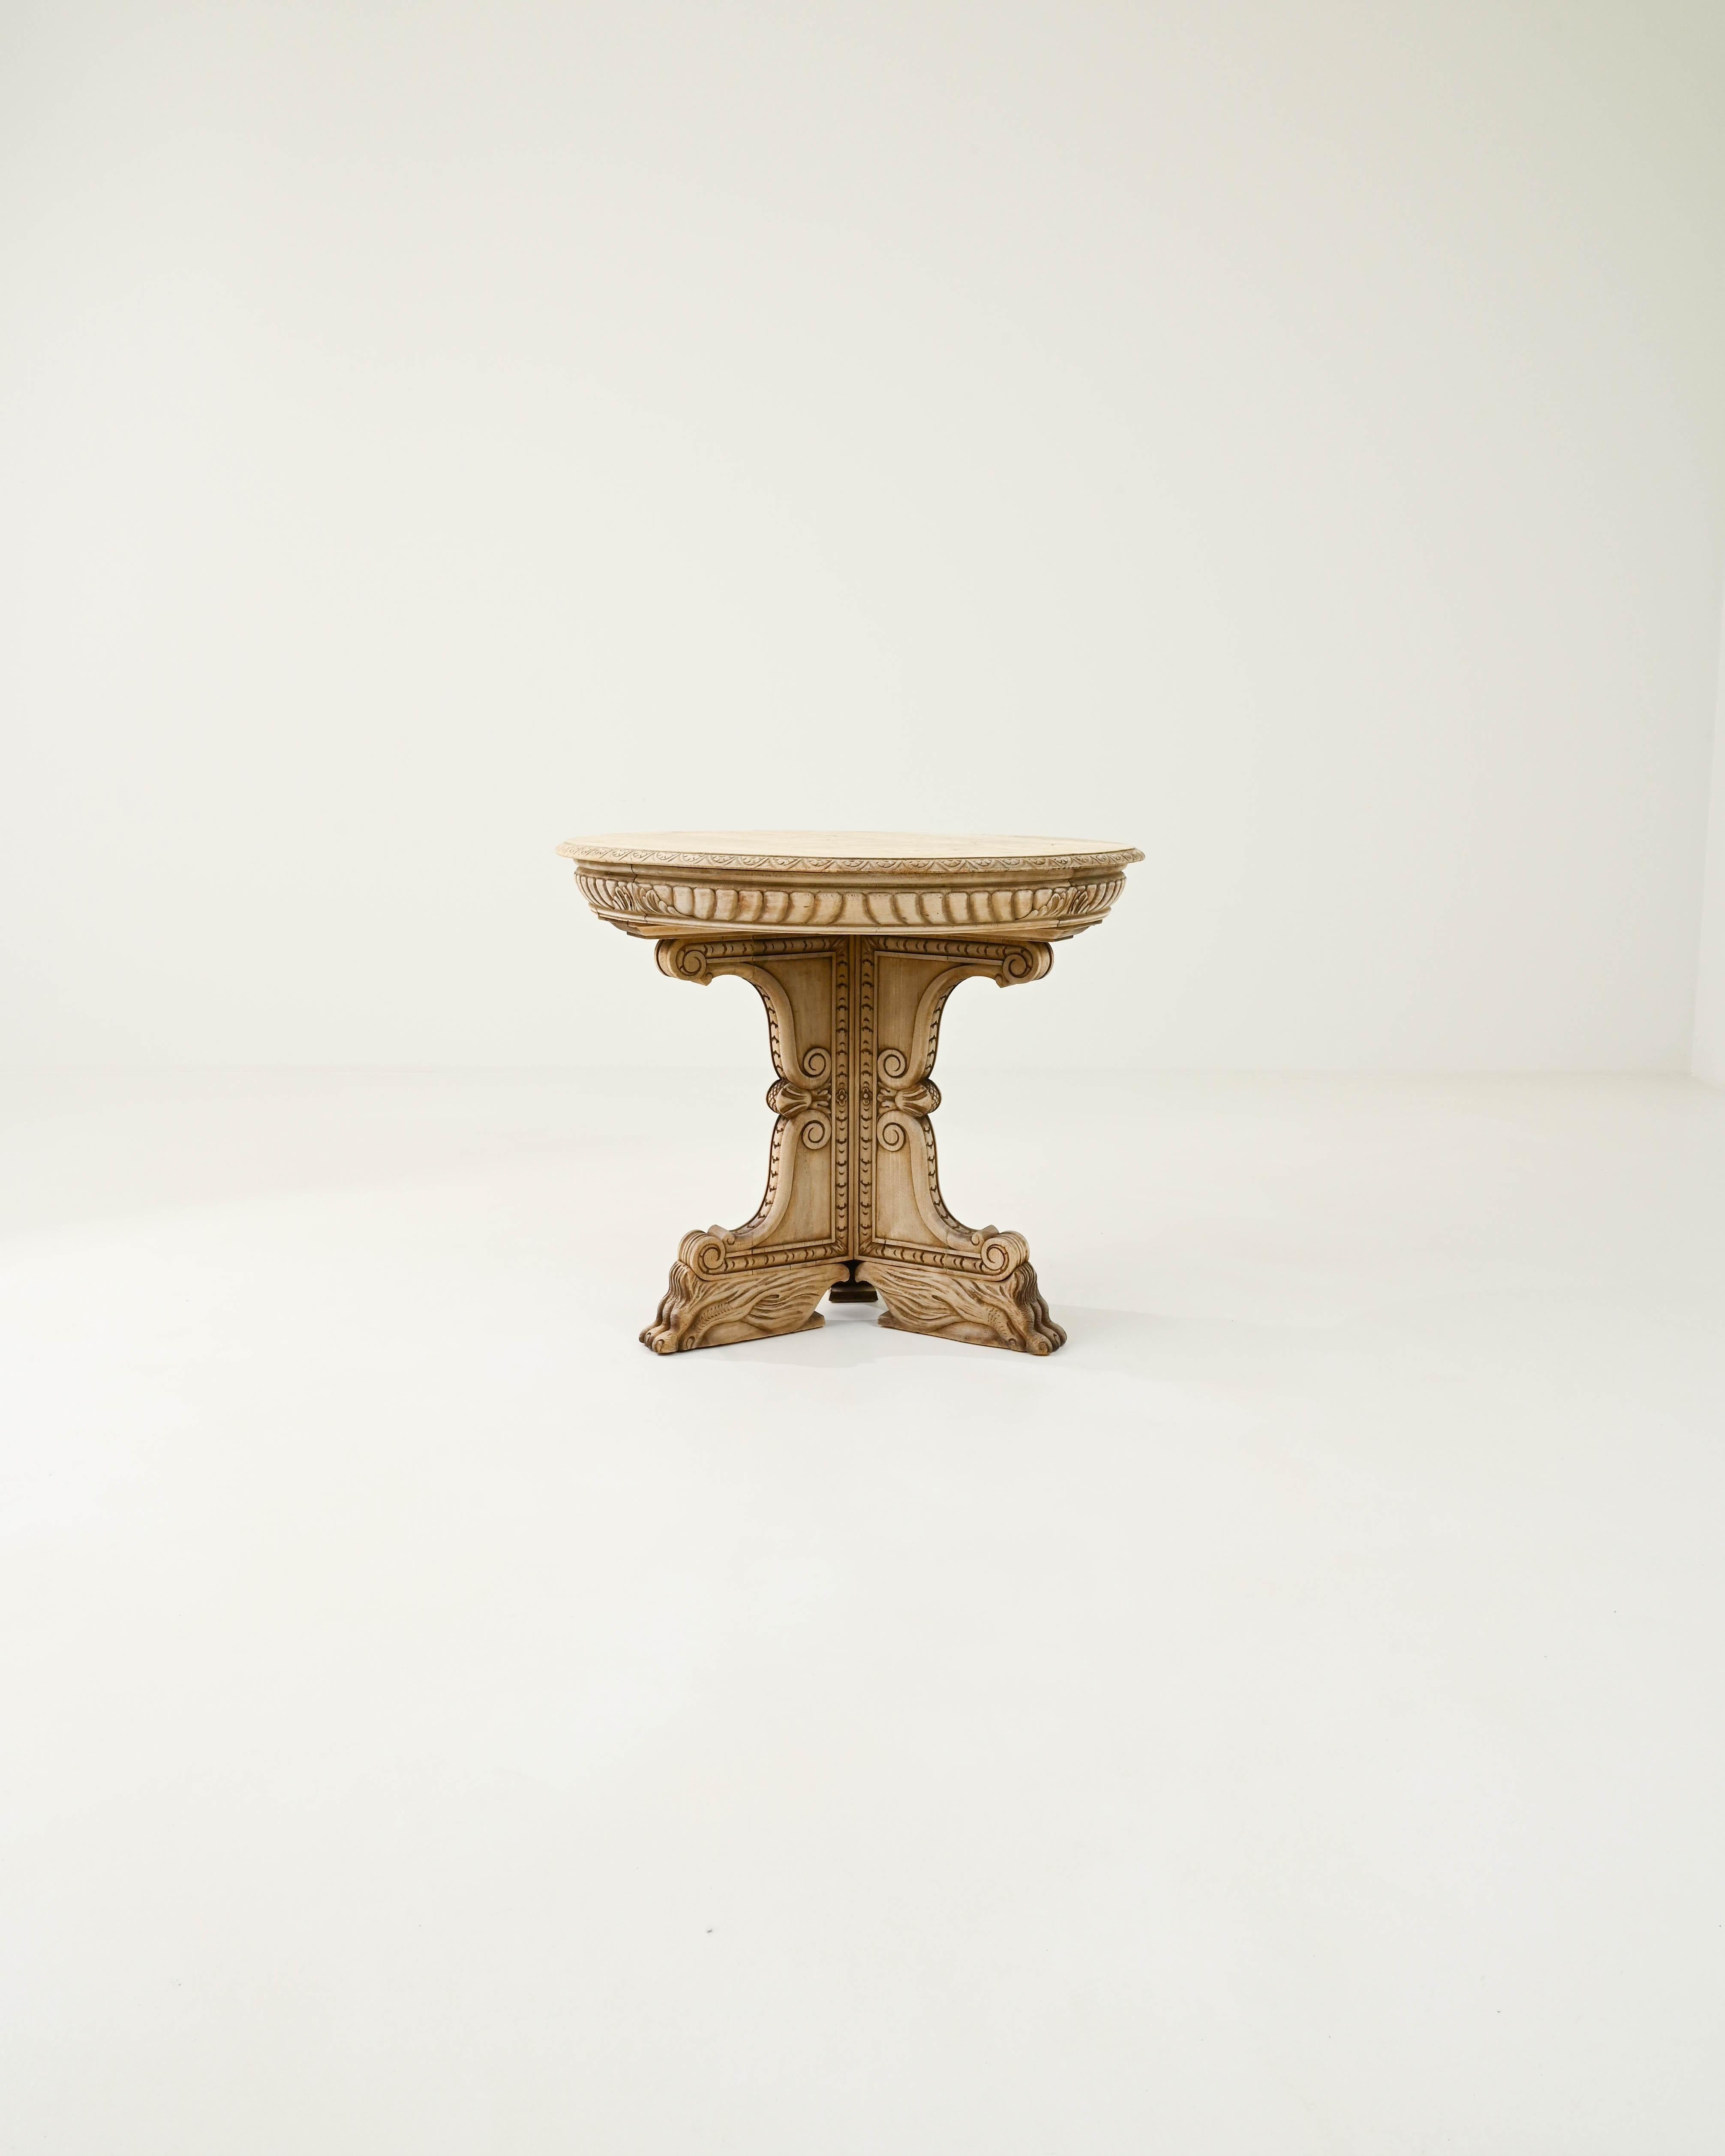 A hardwood table from 19th century France. The circular shaped side table is adorned with elaborate carvings, rendered in typical beech wood. A distinctive Northern French visual language references baroque shapes, from classical architecture and